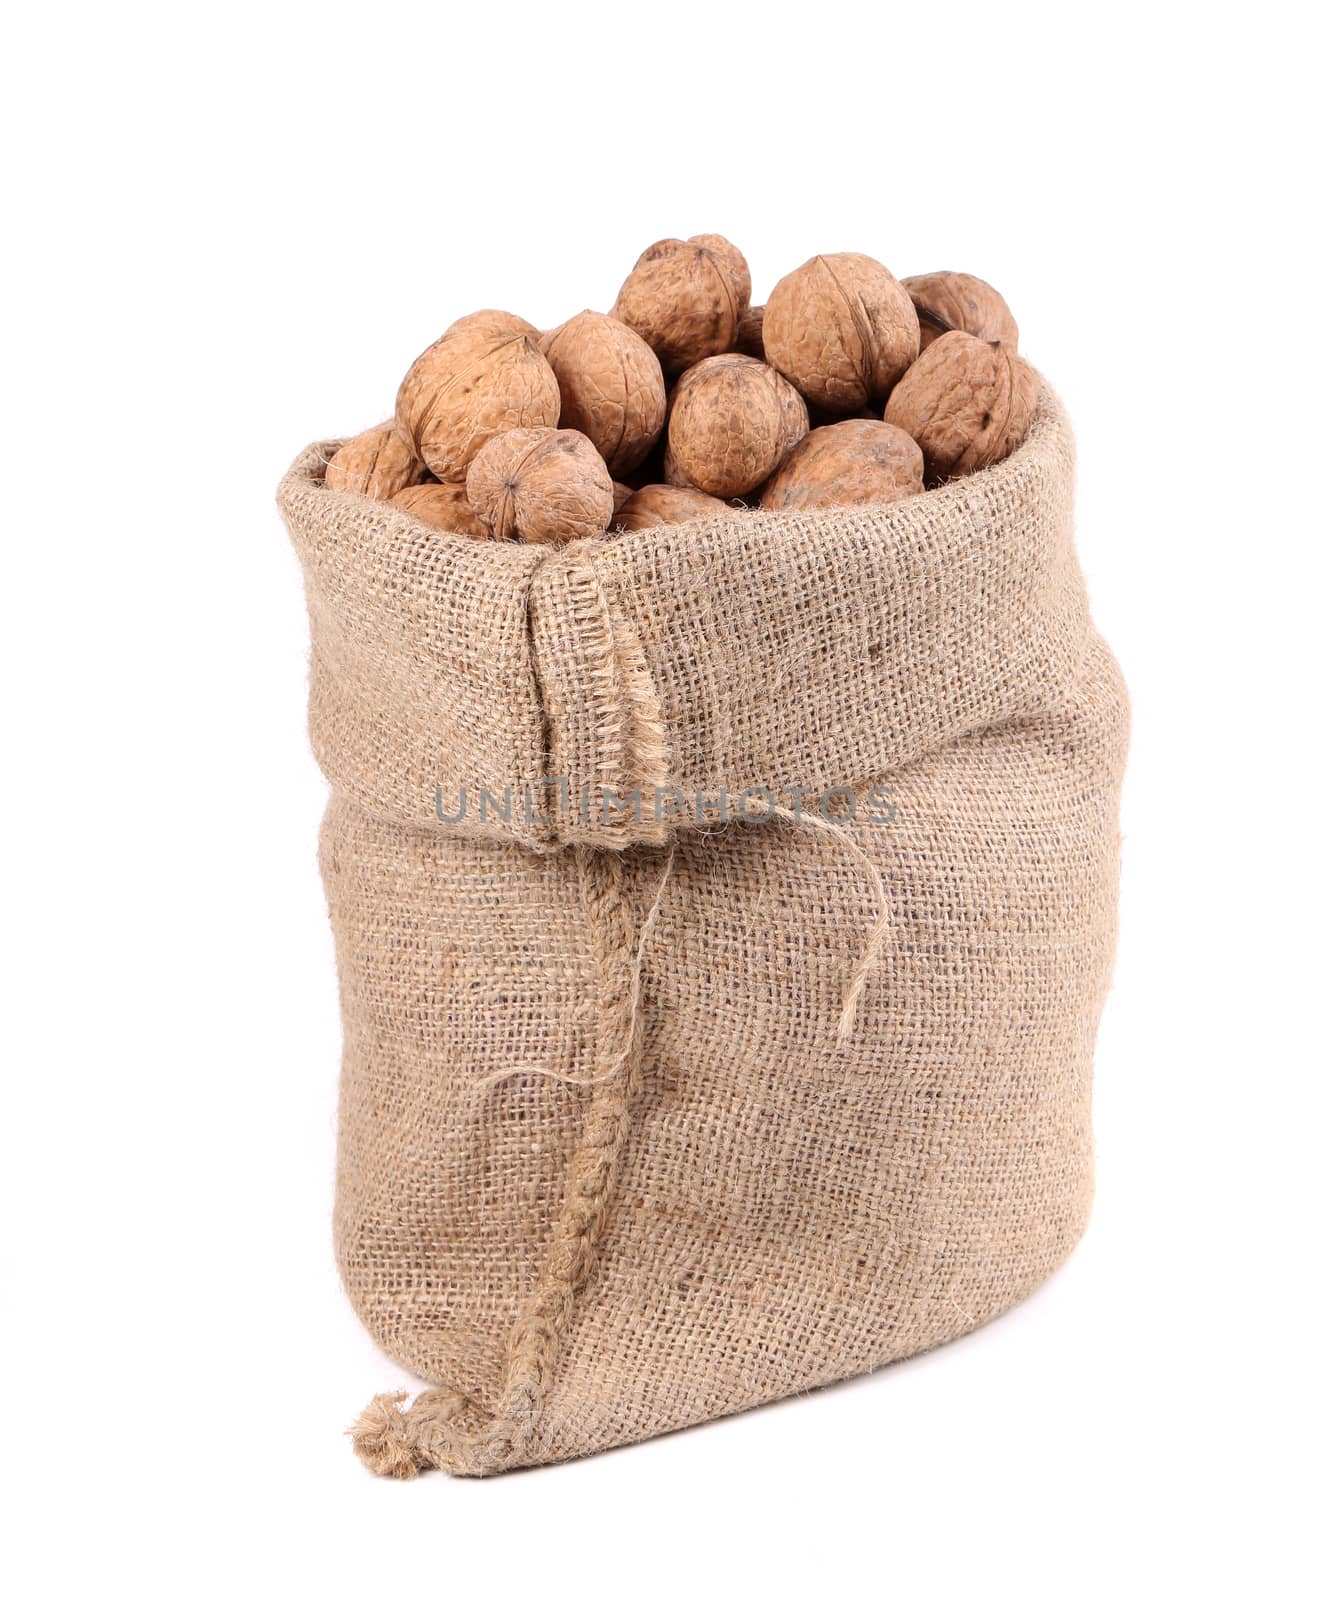 Walnuts in burlap bag. Isolated on a white background.